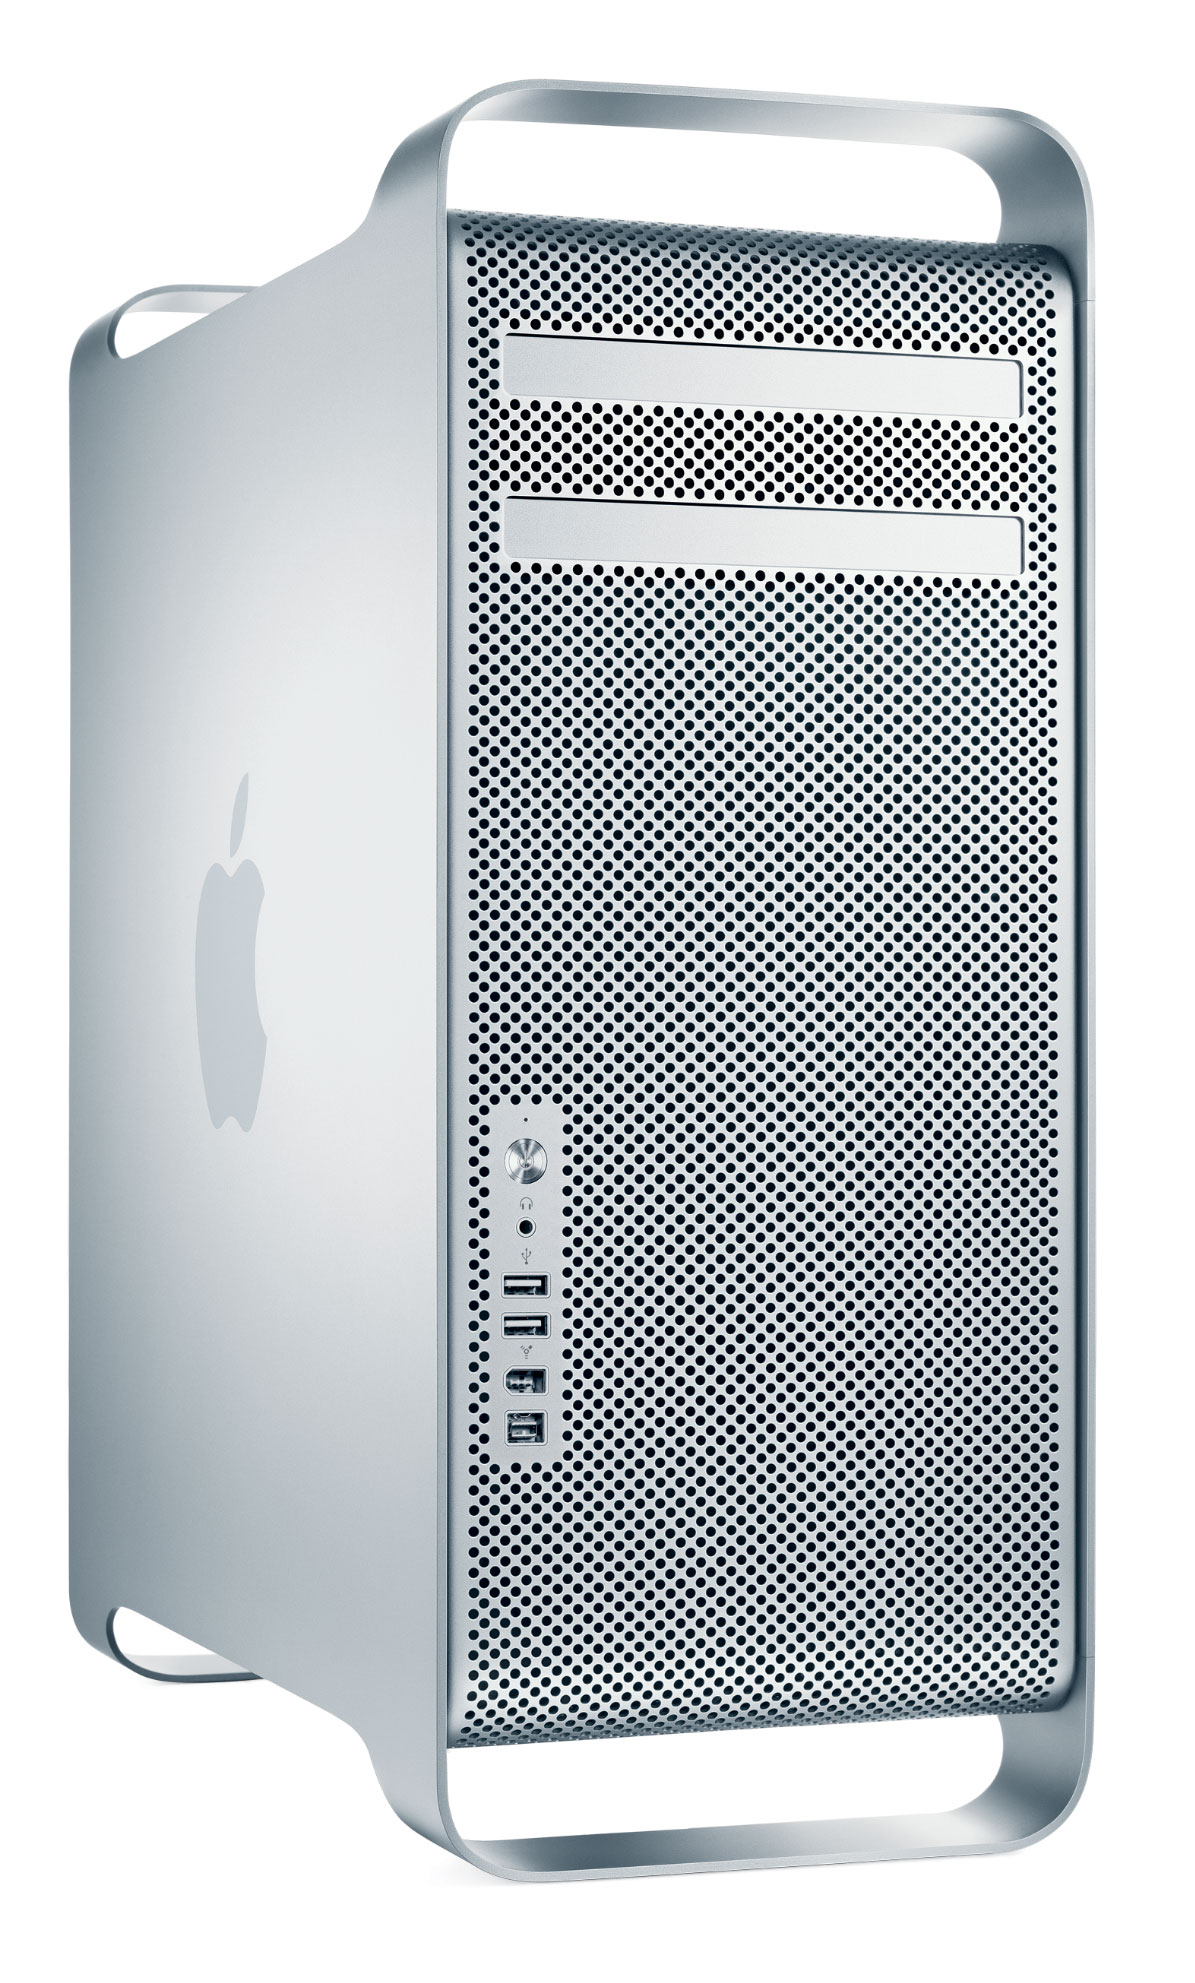 Mac Pro Cases and Parts - Apple